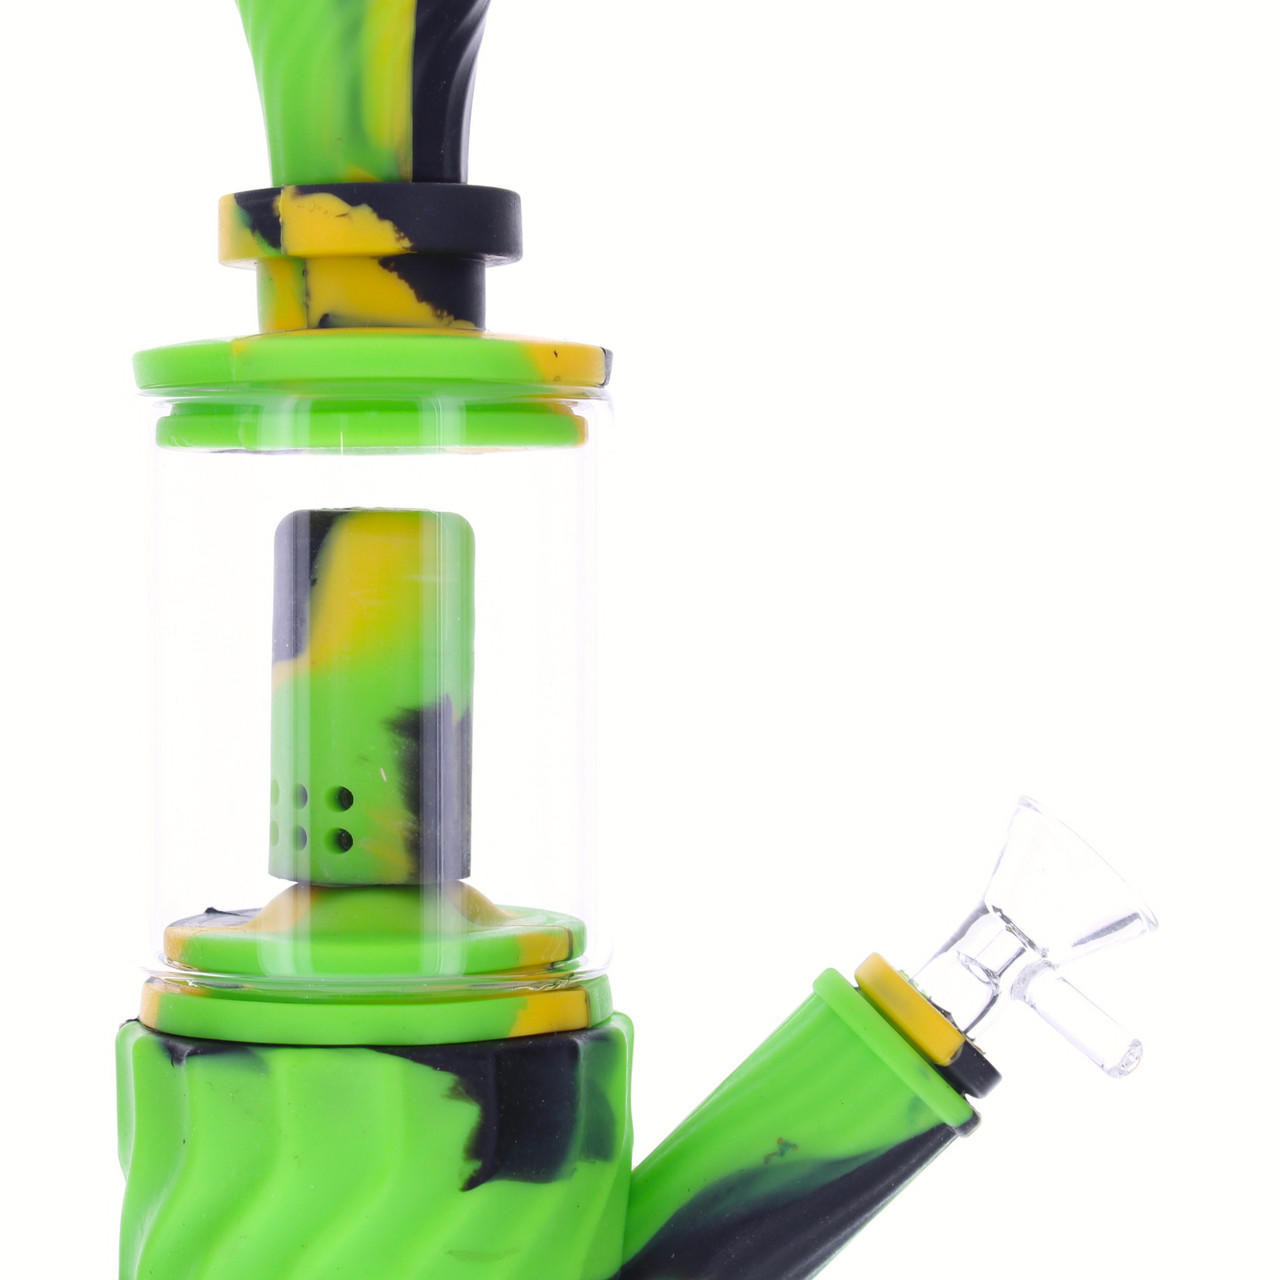 https://cdn11.bigcommerce.com/s-28tw9v9waz/images/stencil/1280x1280/products/1901/8978/vapebrat-11-4-in-1-silicone-glass-hybrid-water-pipe-nectar-collector-and-mini-rig-camo__00181.1681849039.jpg?c=1?imbypass=on